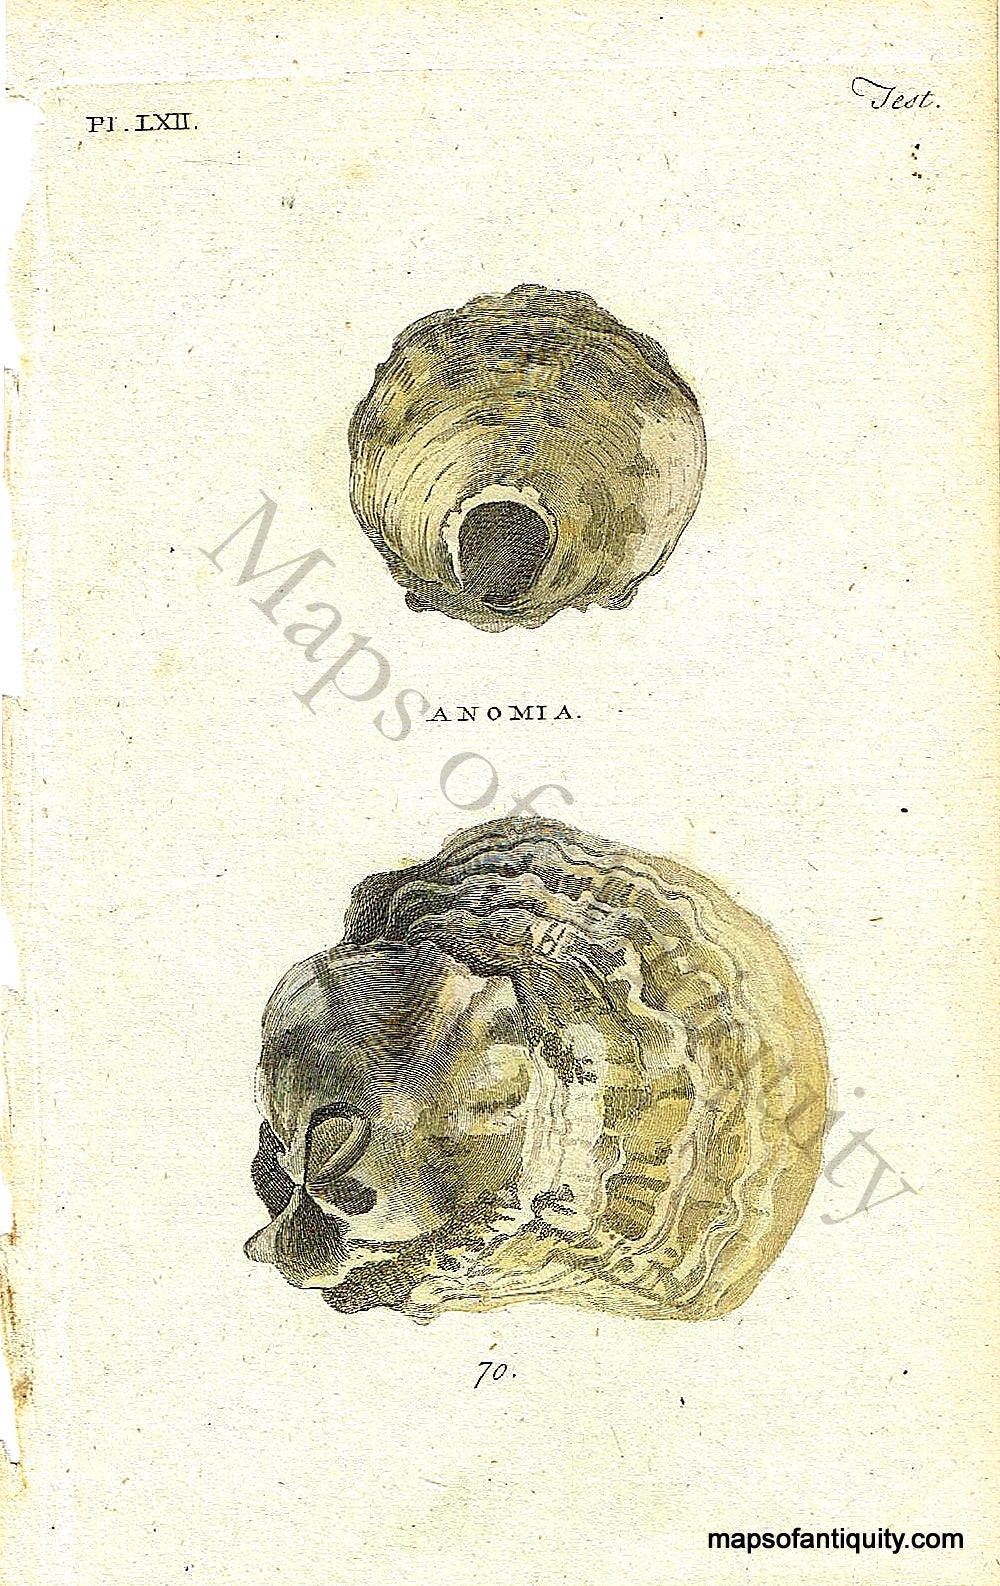 Antique-Hand-Colored-Engraved-Illustration-Anomia-Shells-*********-Natural-History-Prints-Shells-c.-1760--Maps-Of-Antiquity